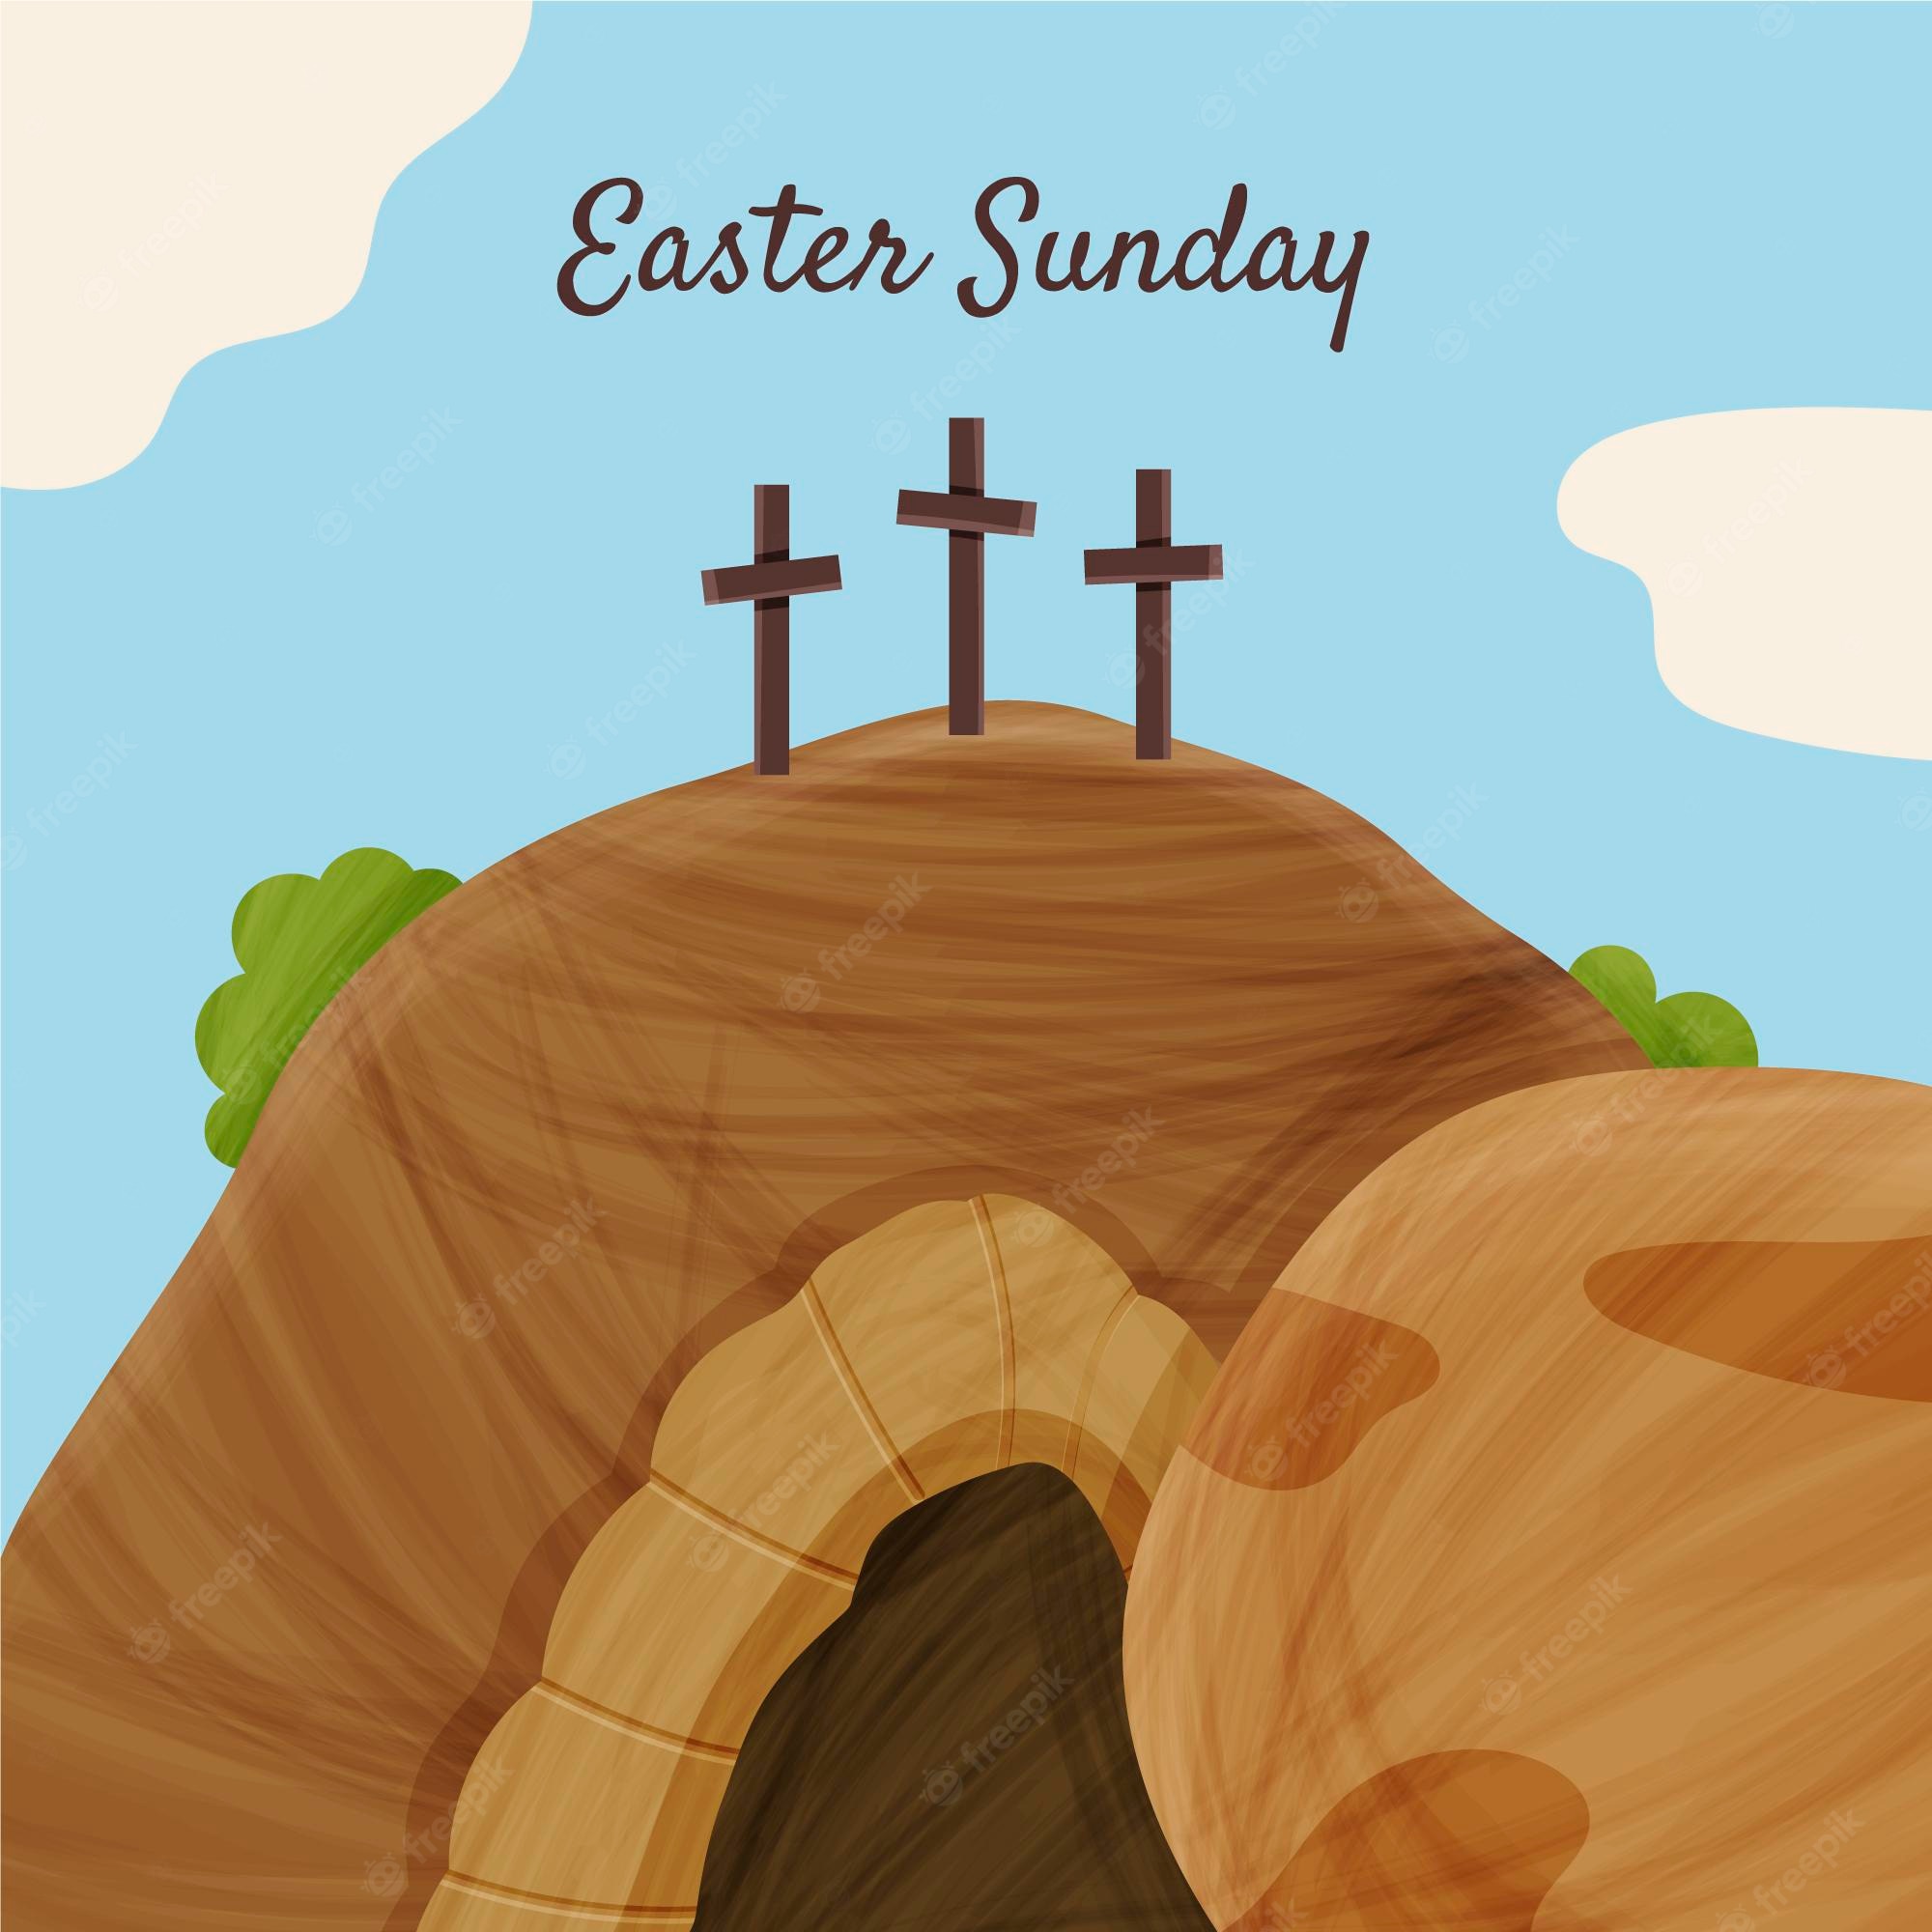 Easter Sunday Clipart for All Your Easter Season Needs | ChurchArt ...